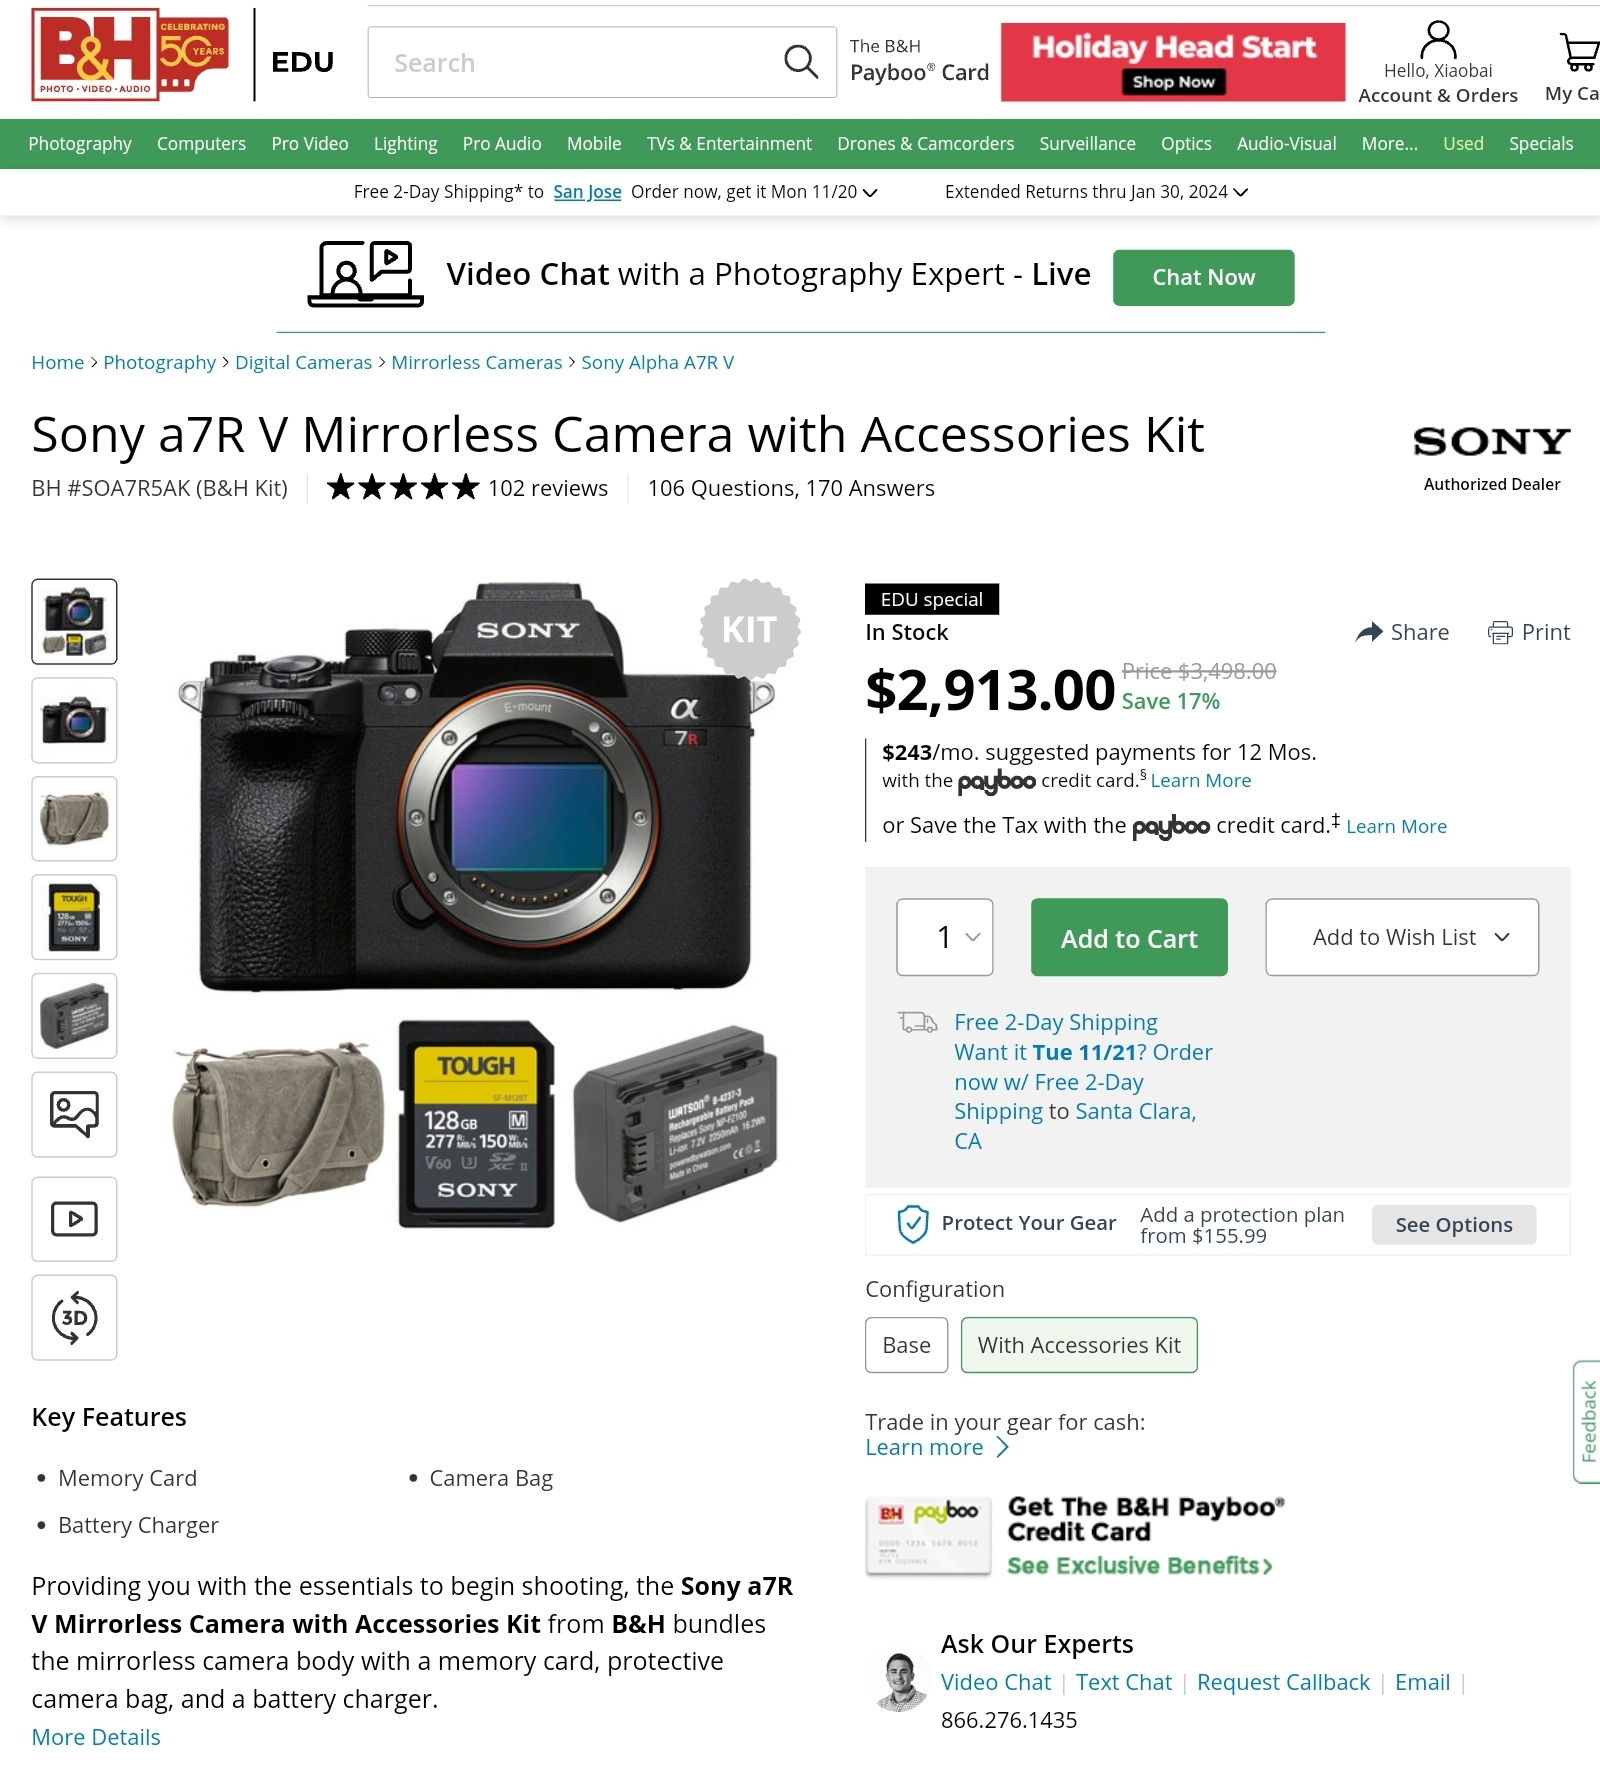 Sony a7R V Mirrorless Camera with Accessories Kit B&H Photo